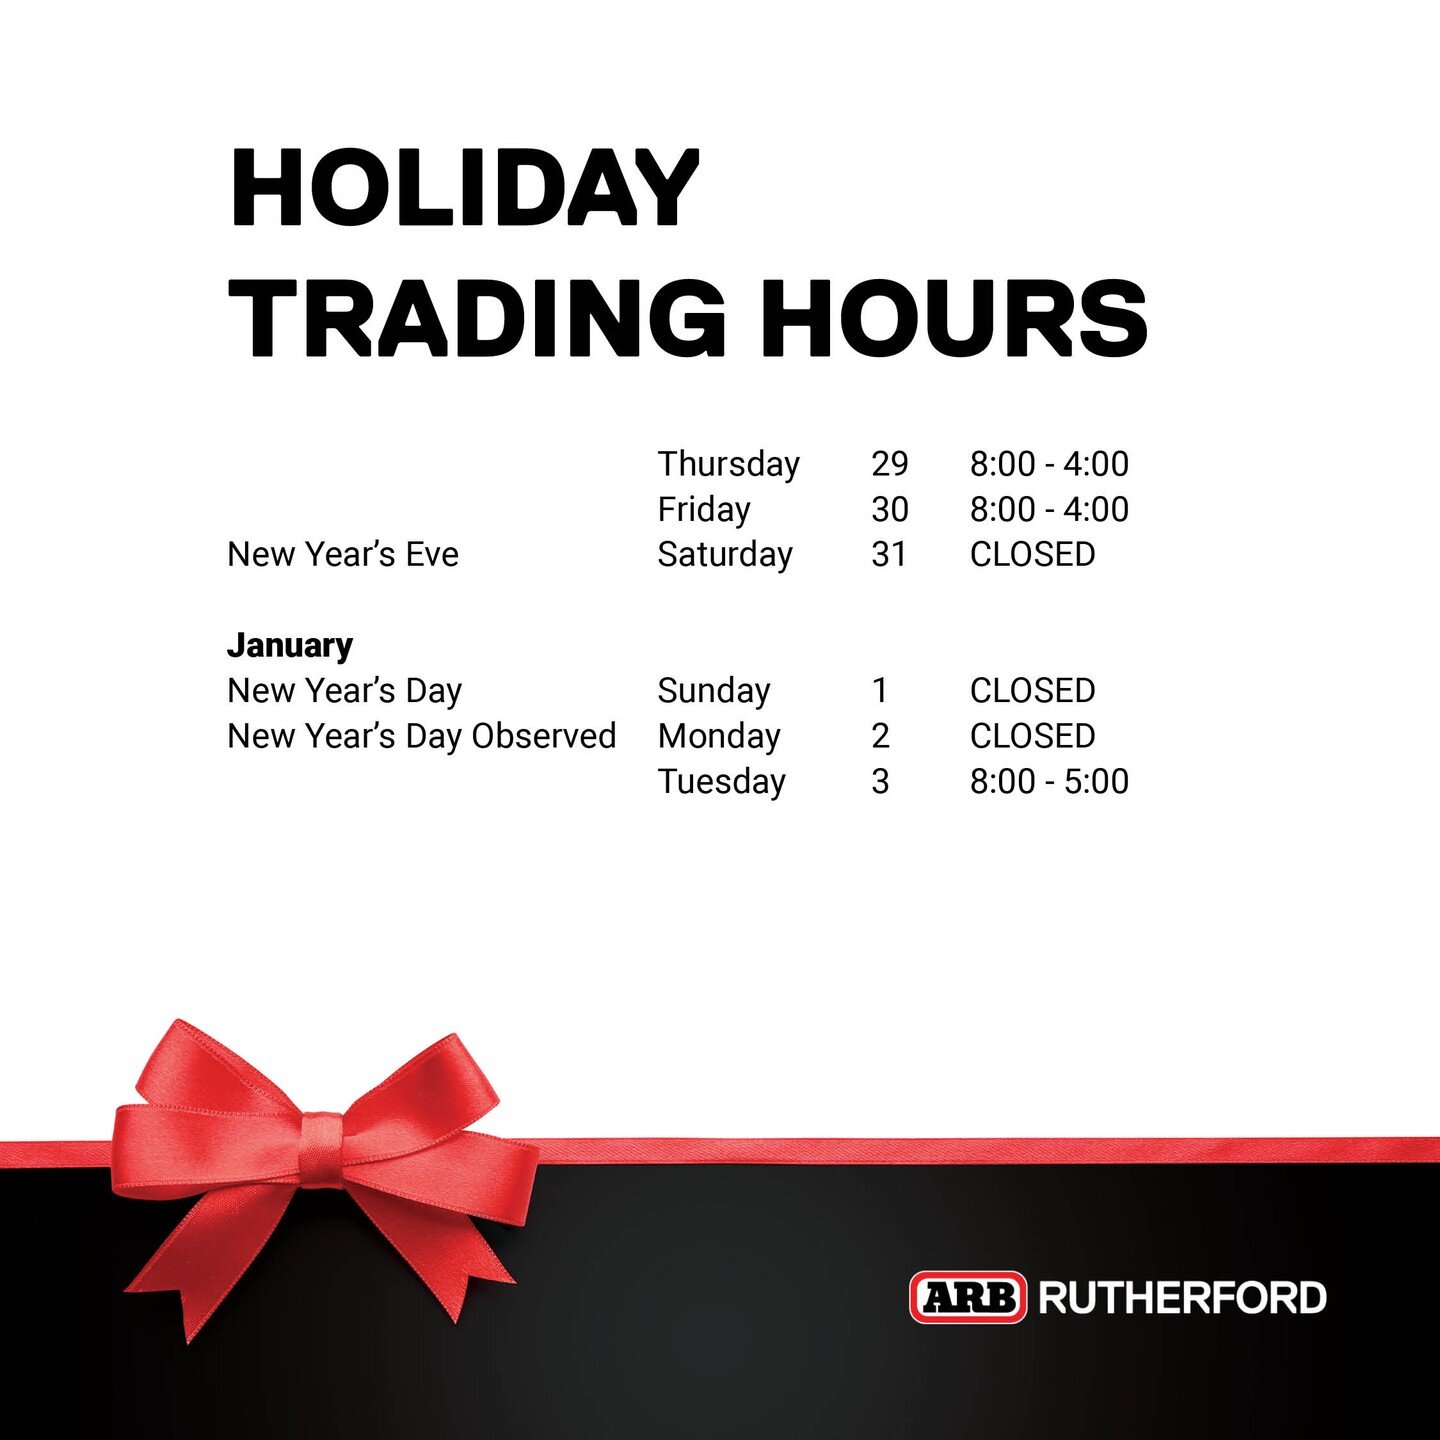 Jot these hours down and call in and see us over the holidays.

You can find us at 77 Mustang Drive, Rutherford in our massive flagship ARB store.